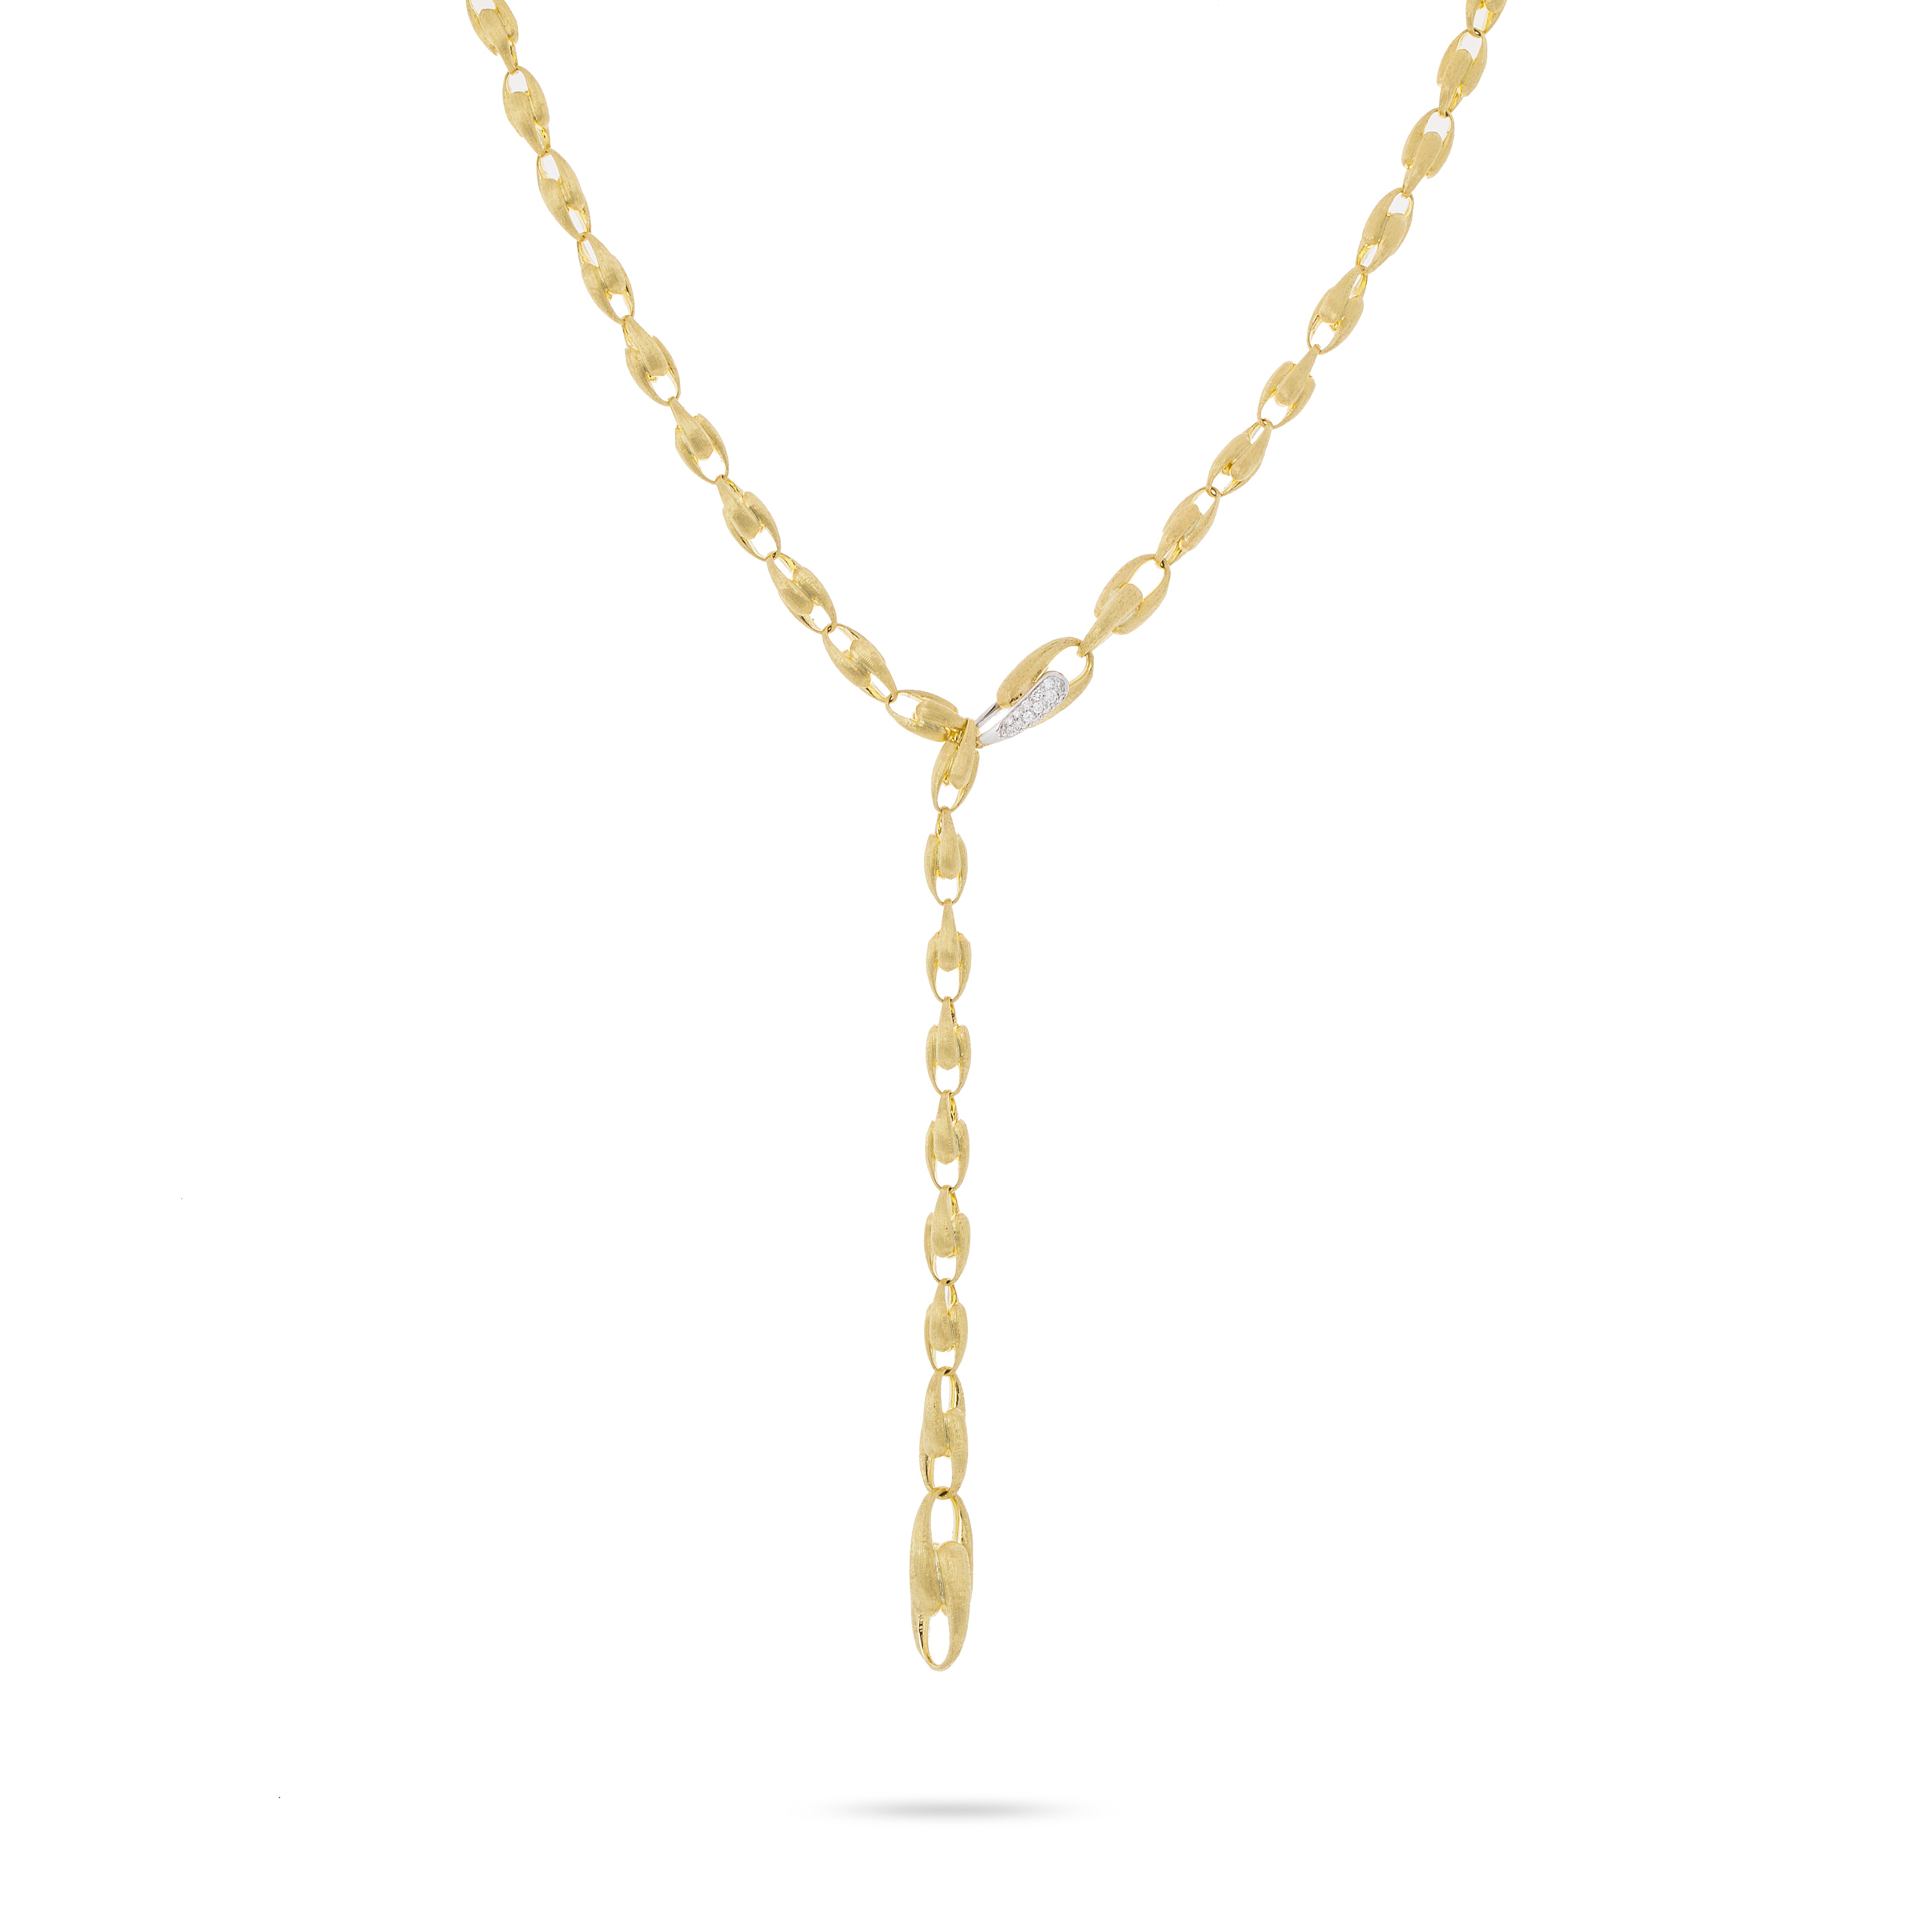 MARCO BICEGO 18KY LUCIA LARIAT NECKLACE